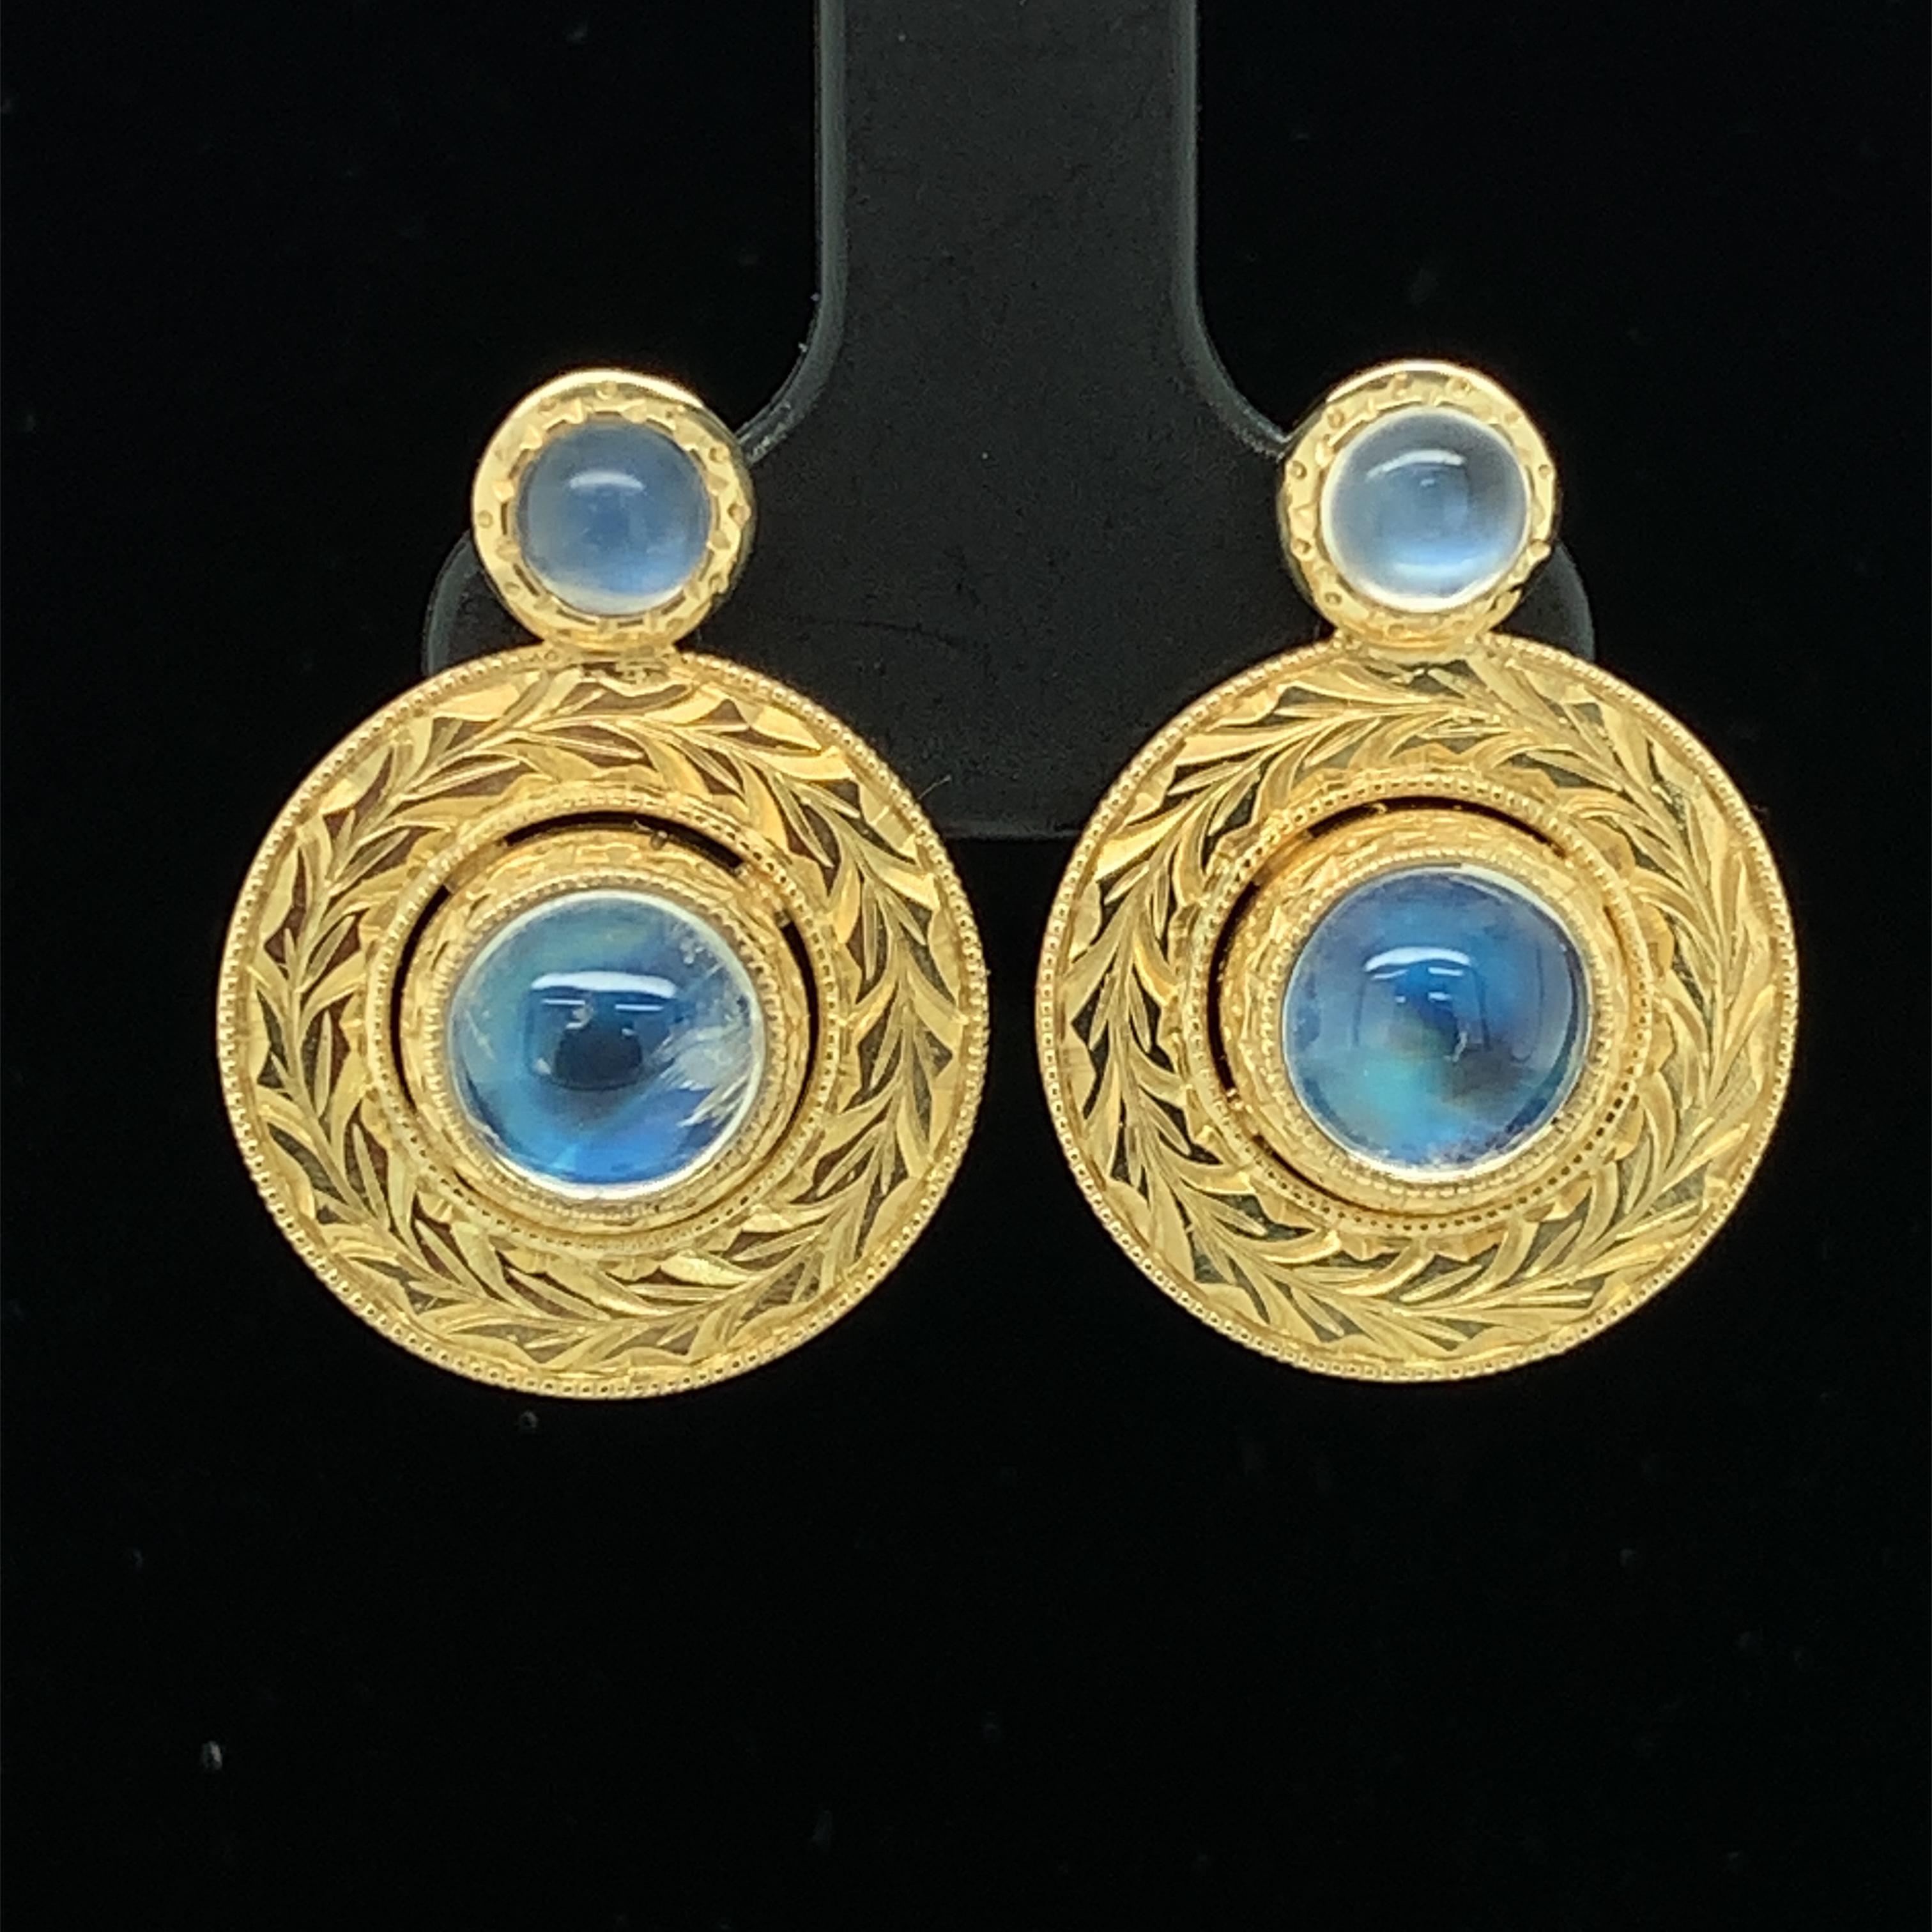 Moonstones with such fine color and quality as those in these 18k yellow gold earrings are seldom seen. These handmade earrings, made by our Master Jeweler, feature highly transparent and well-matched moonstones that display exceptional